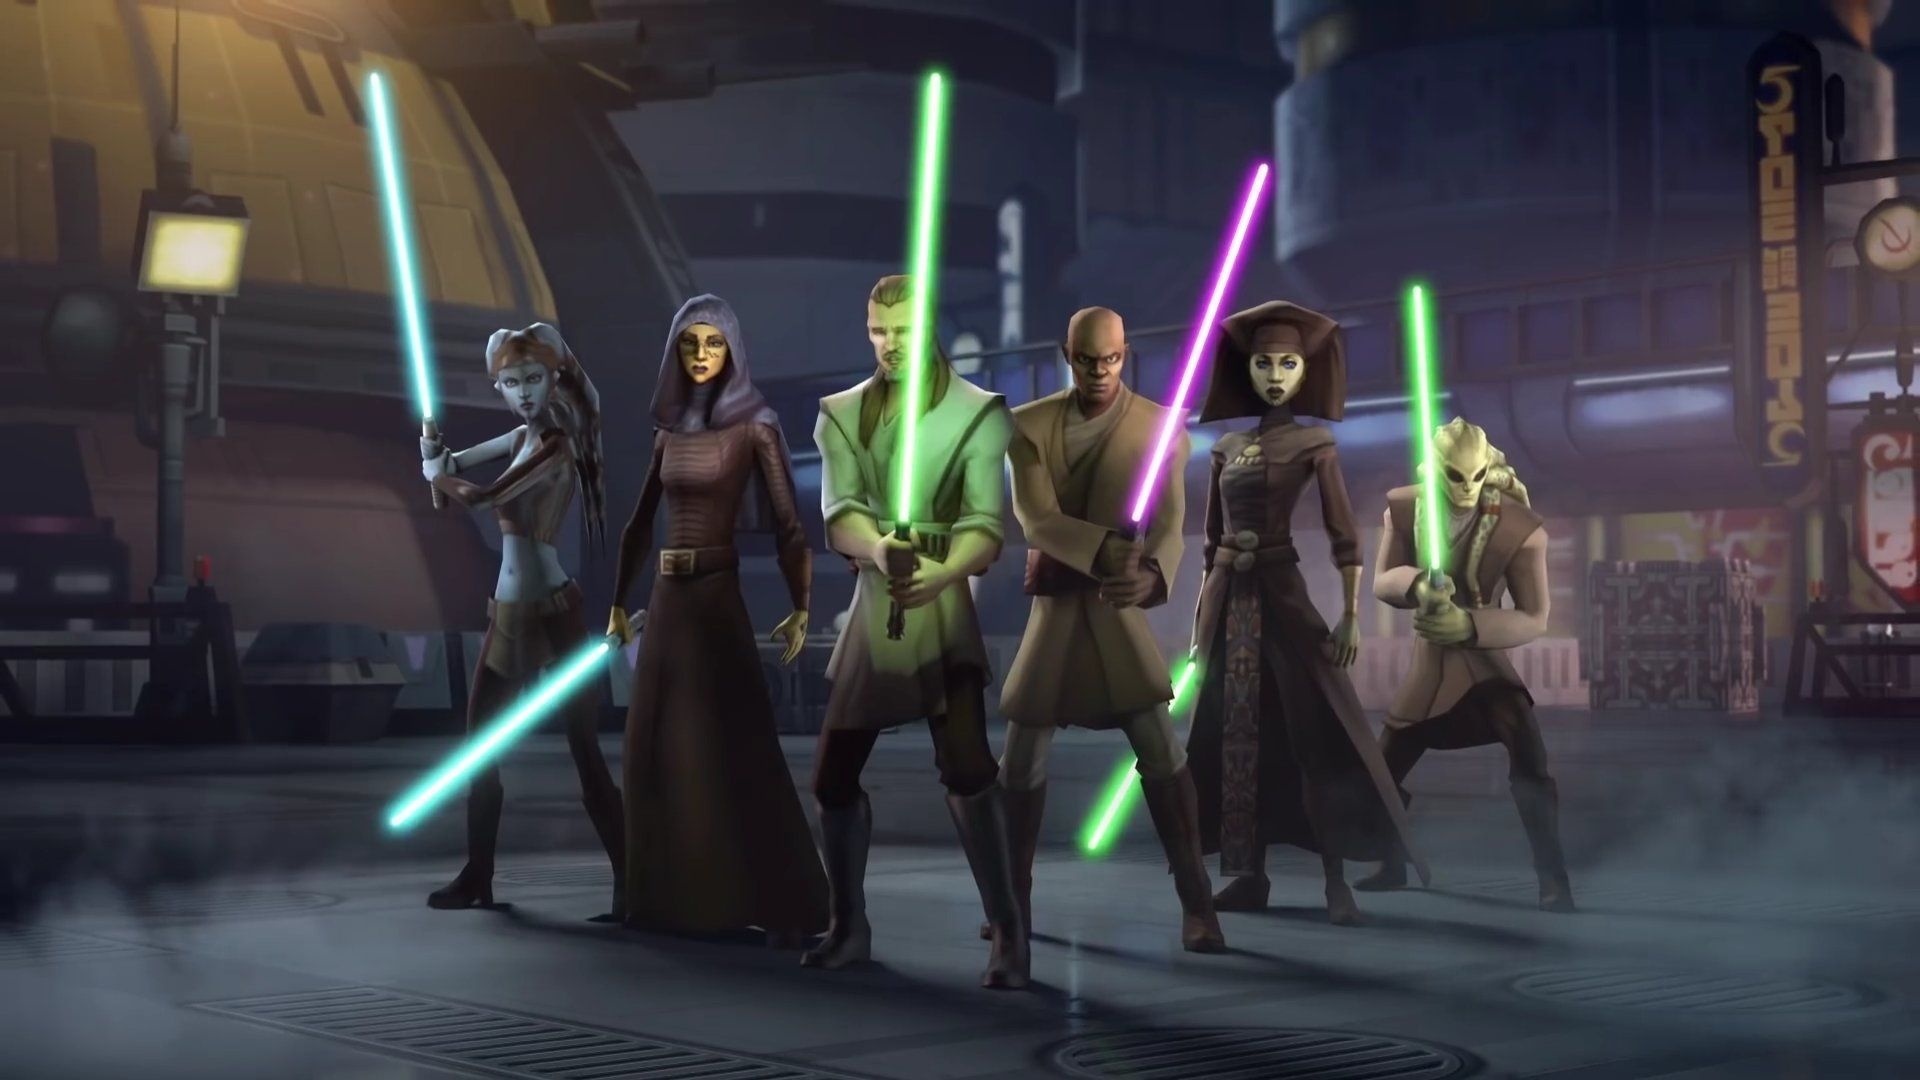 Star Wars: Galaxy of Heroes: Holographic characters, Battles fought in PVE and PVP formats. 1920x1080 Full HD Background.